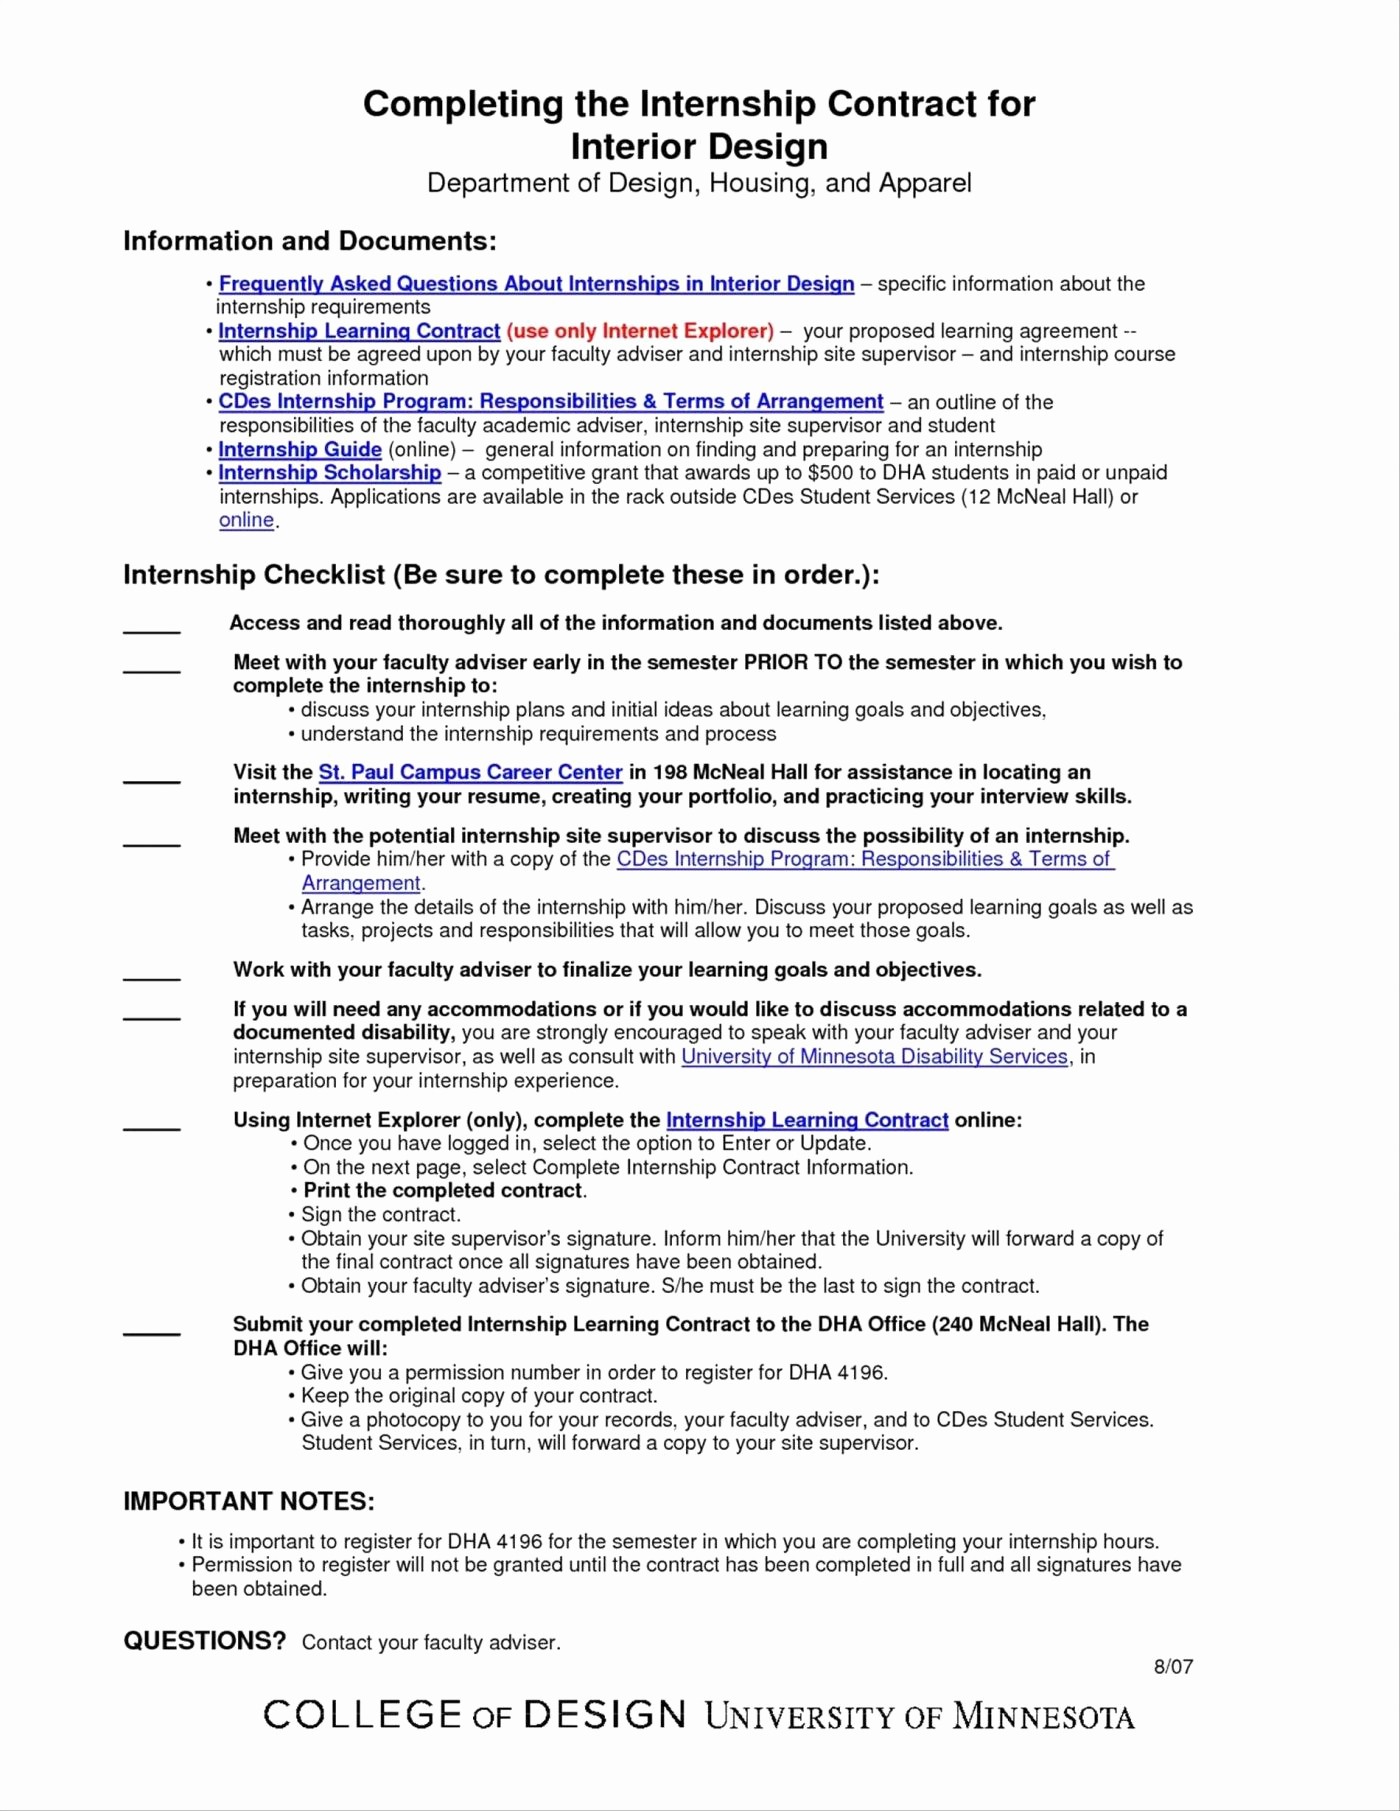 Boat Rental Agreement Template Luxury Business Plan Hire Document Contract